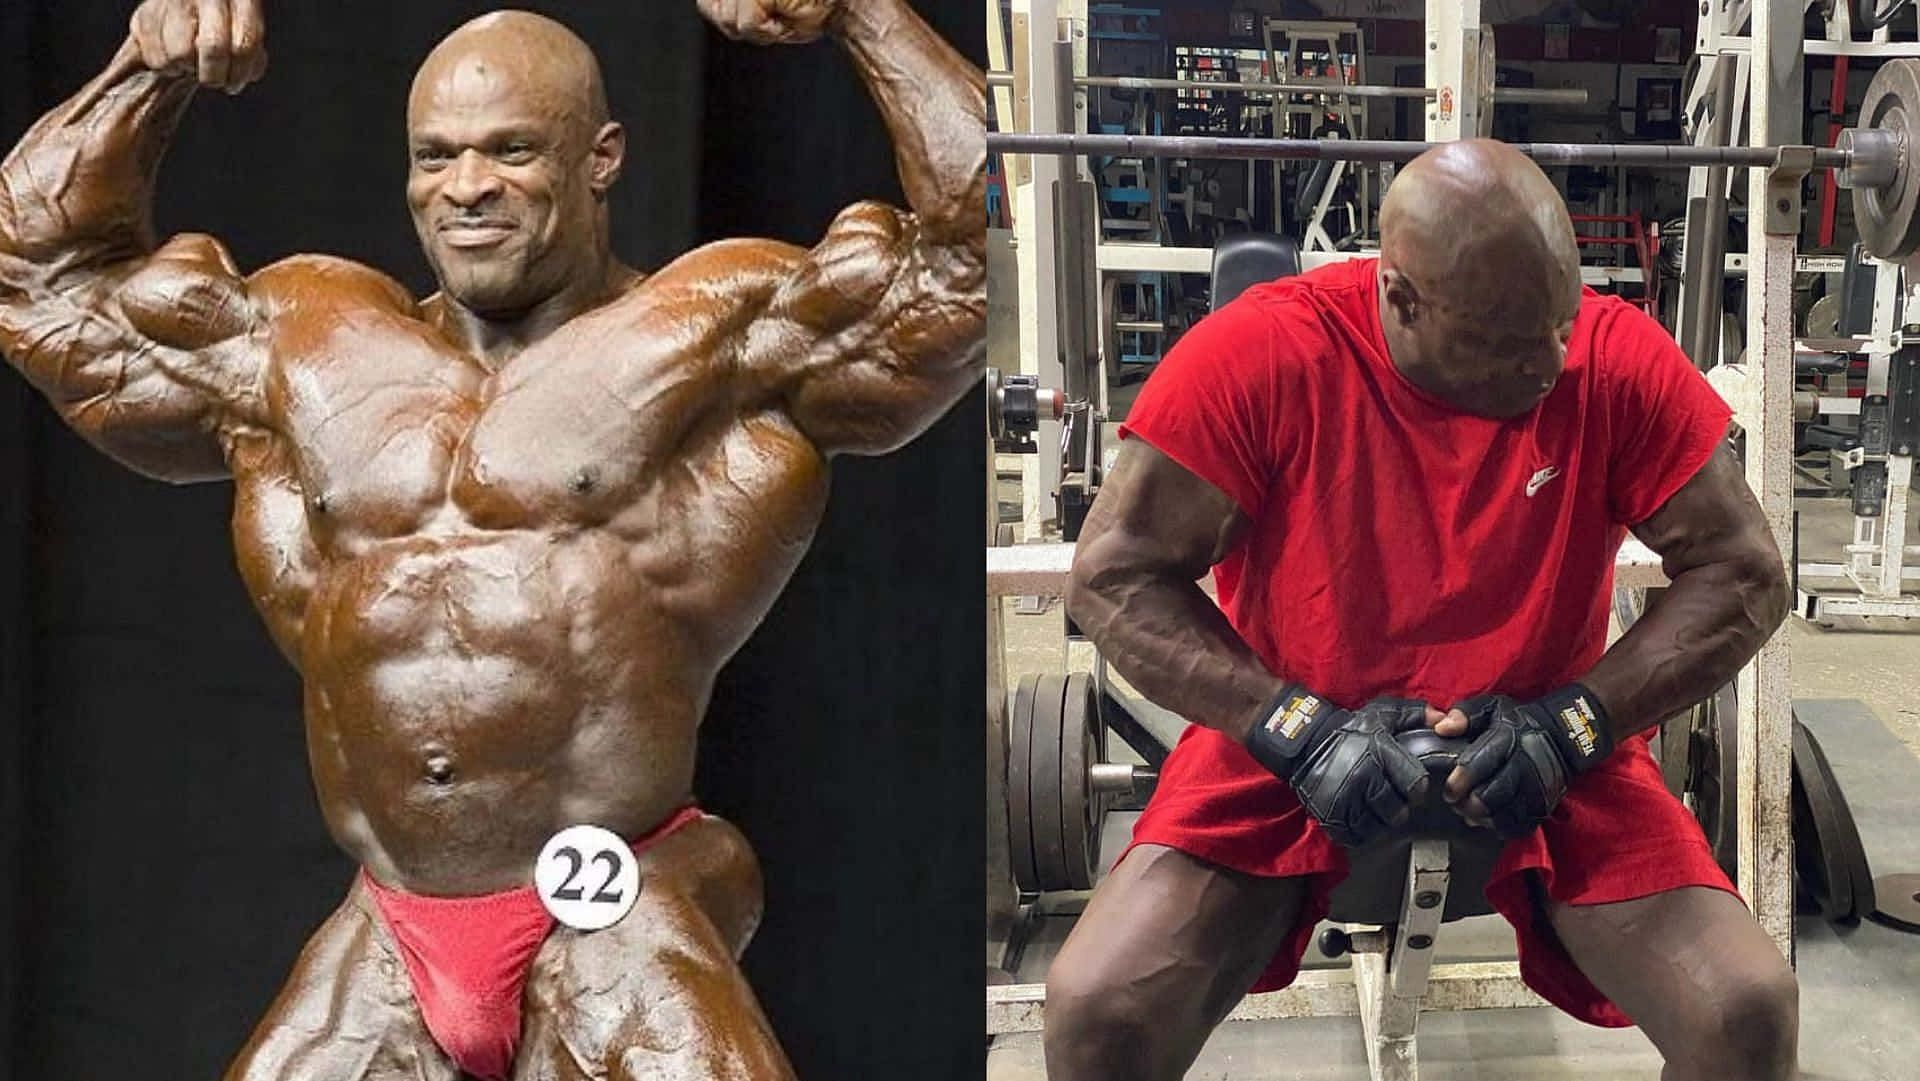 Bodybuilding Legend Ronnie Coleman Shares His Rules for Success